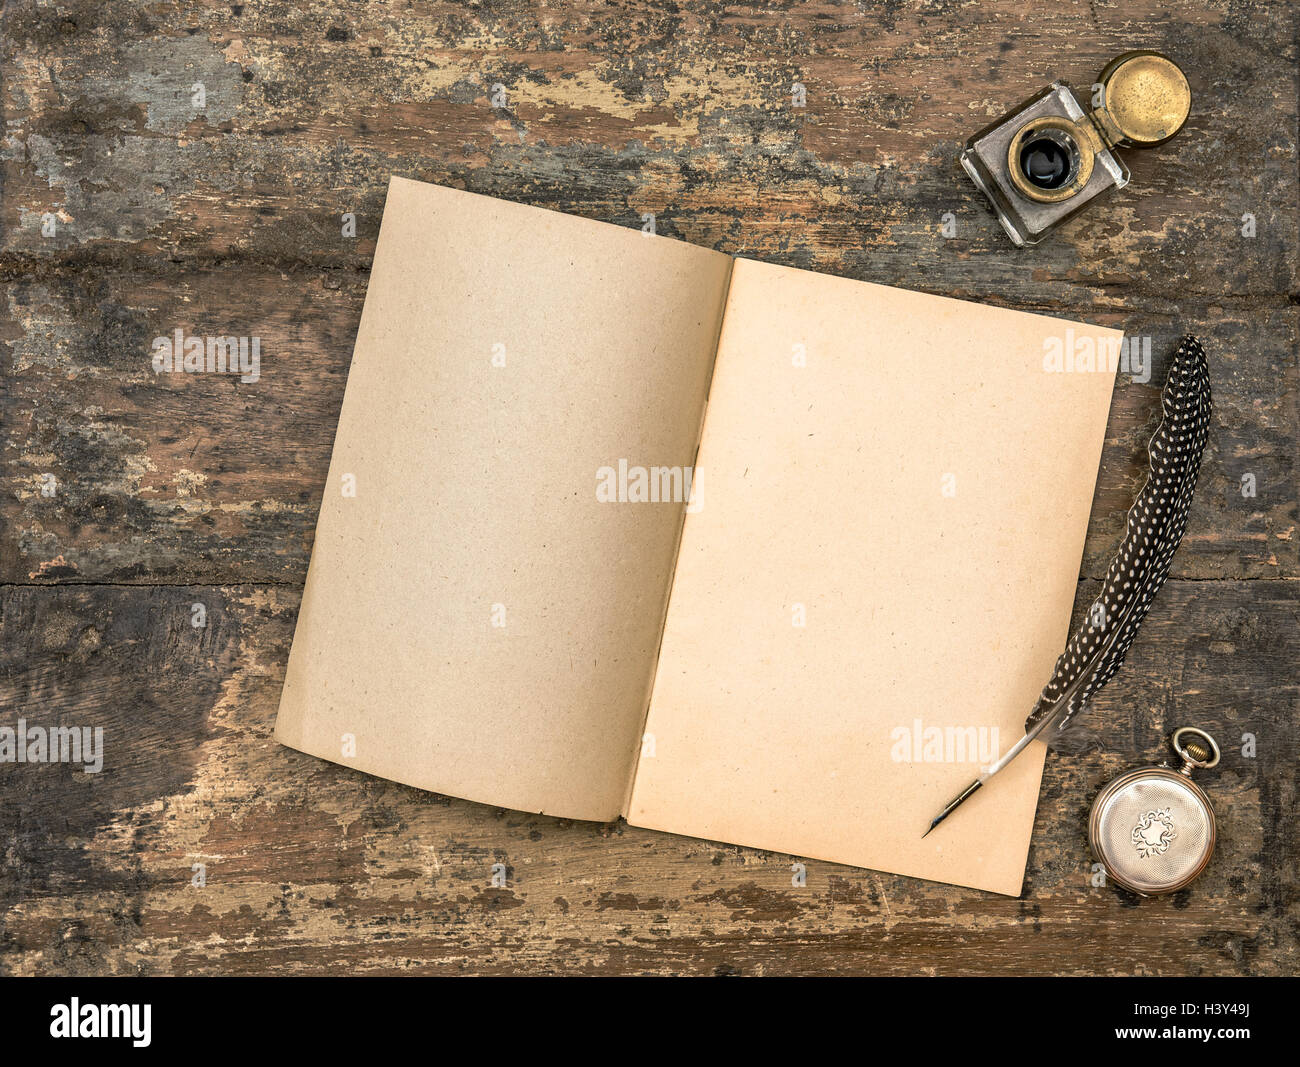 Open diary book and vintage office supplies on wooden table Stock Photo